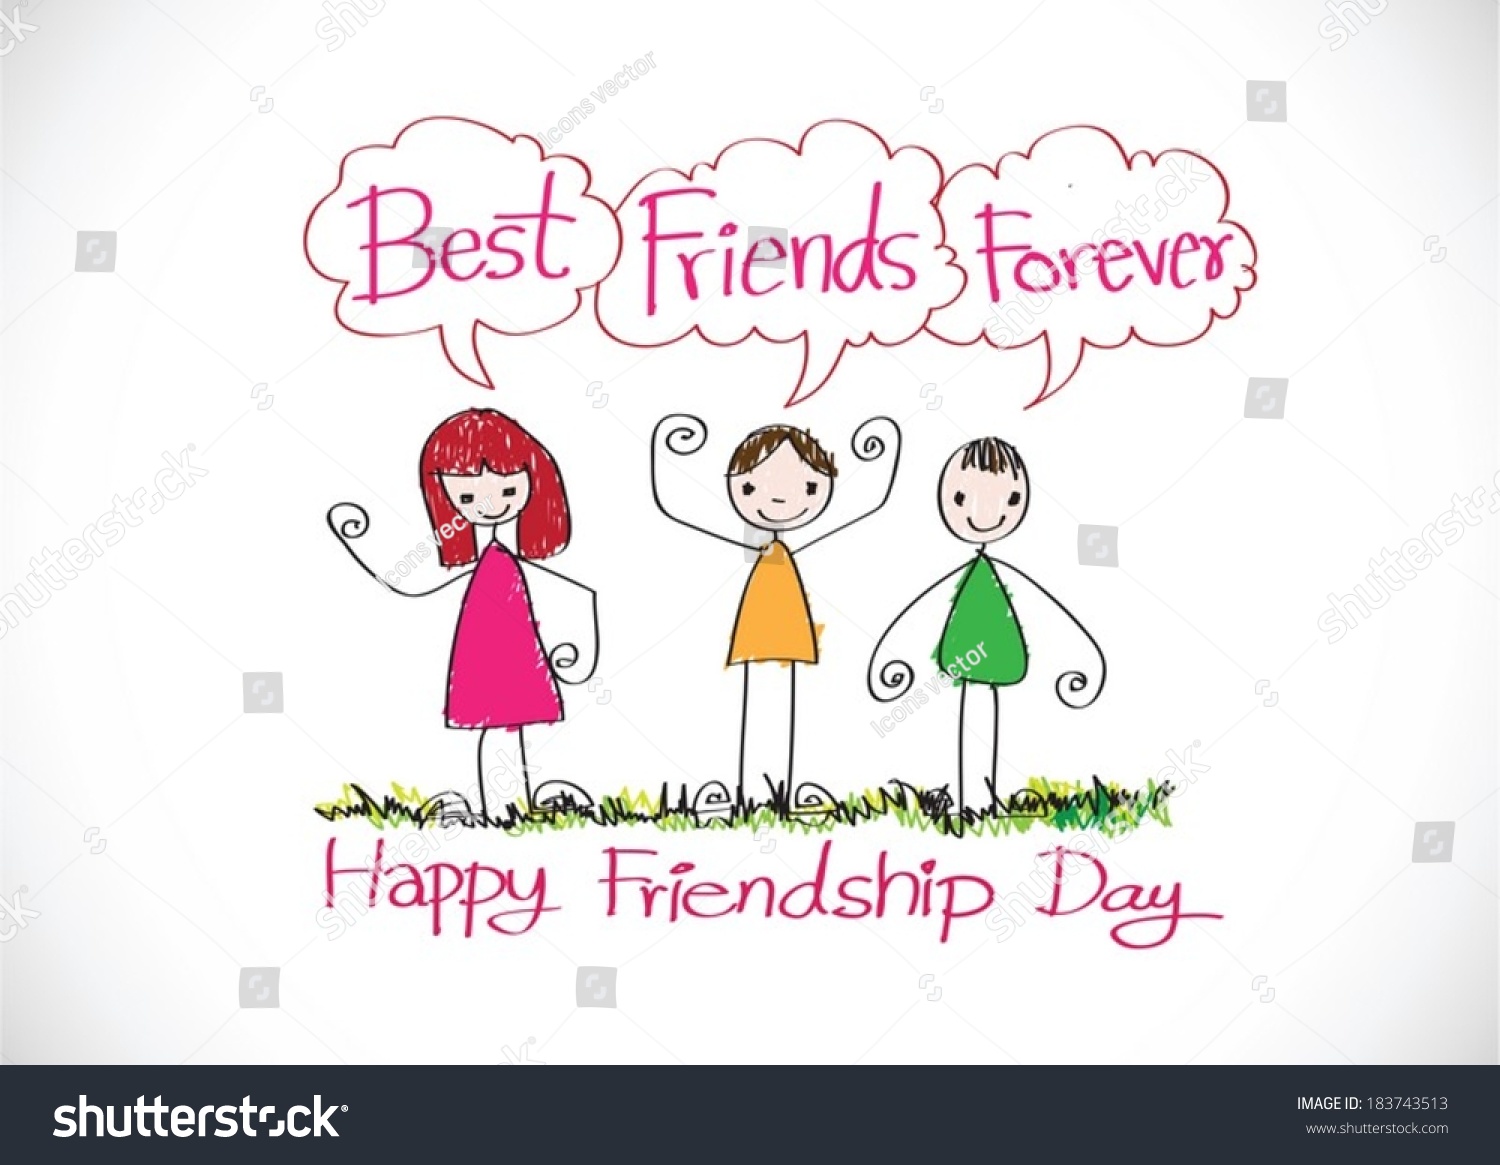 Happy Friendship Day And Best Friends Forever Idea Design Stock Vector ...